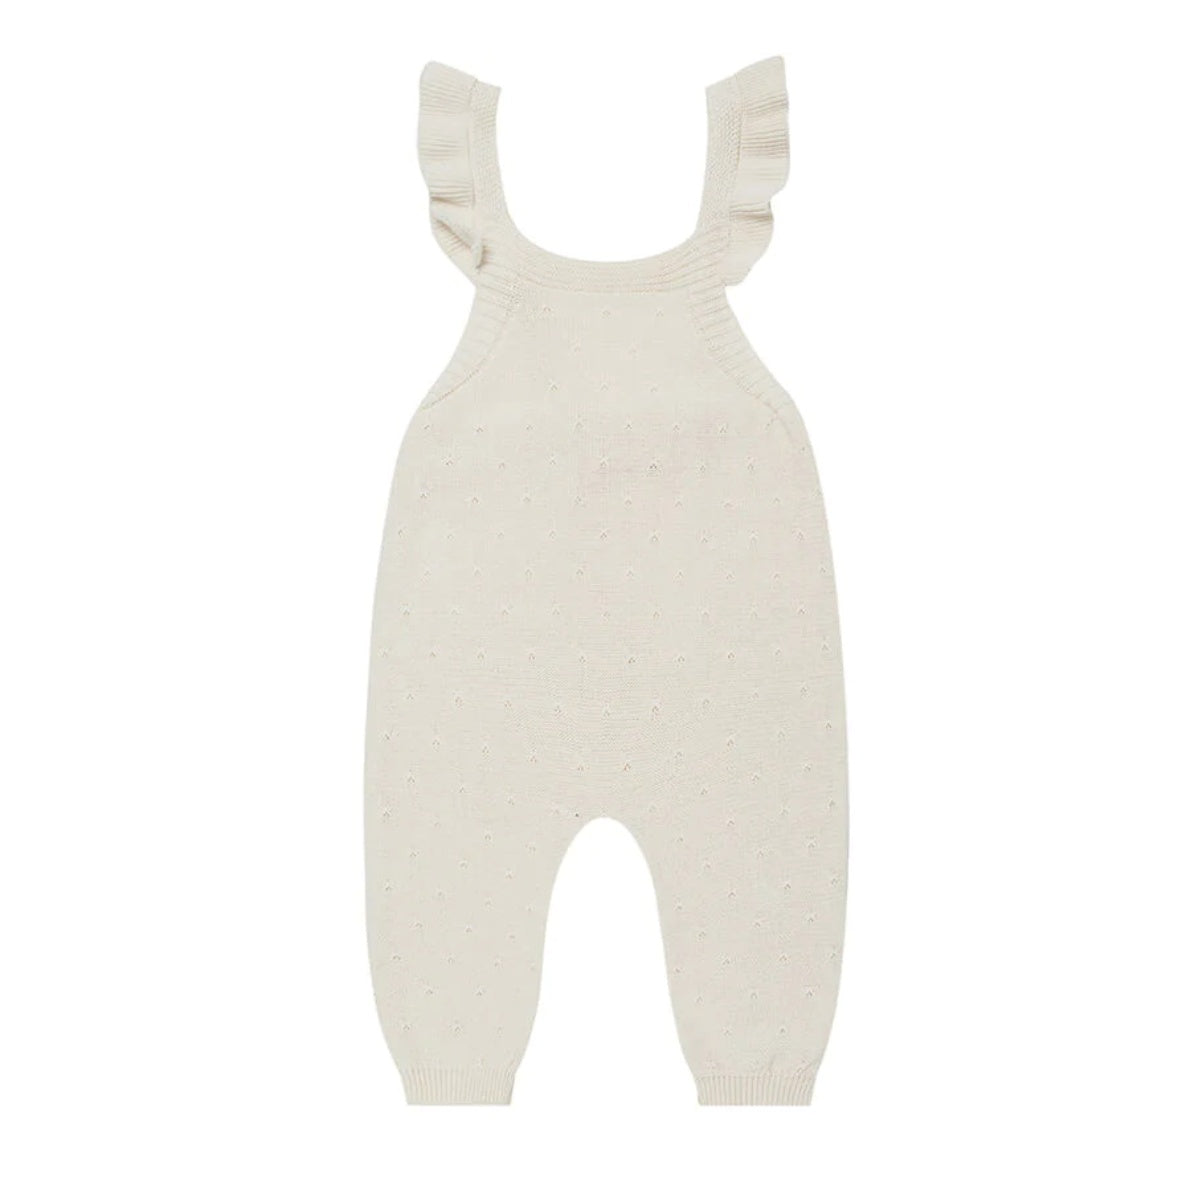 Pointelle knit overalls - Natural